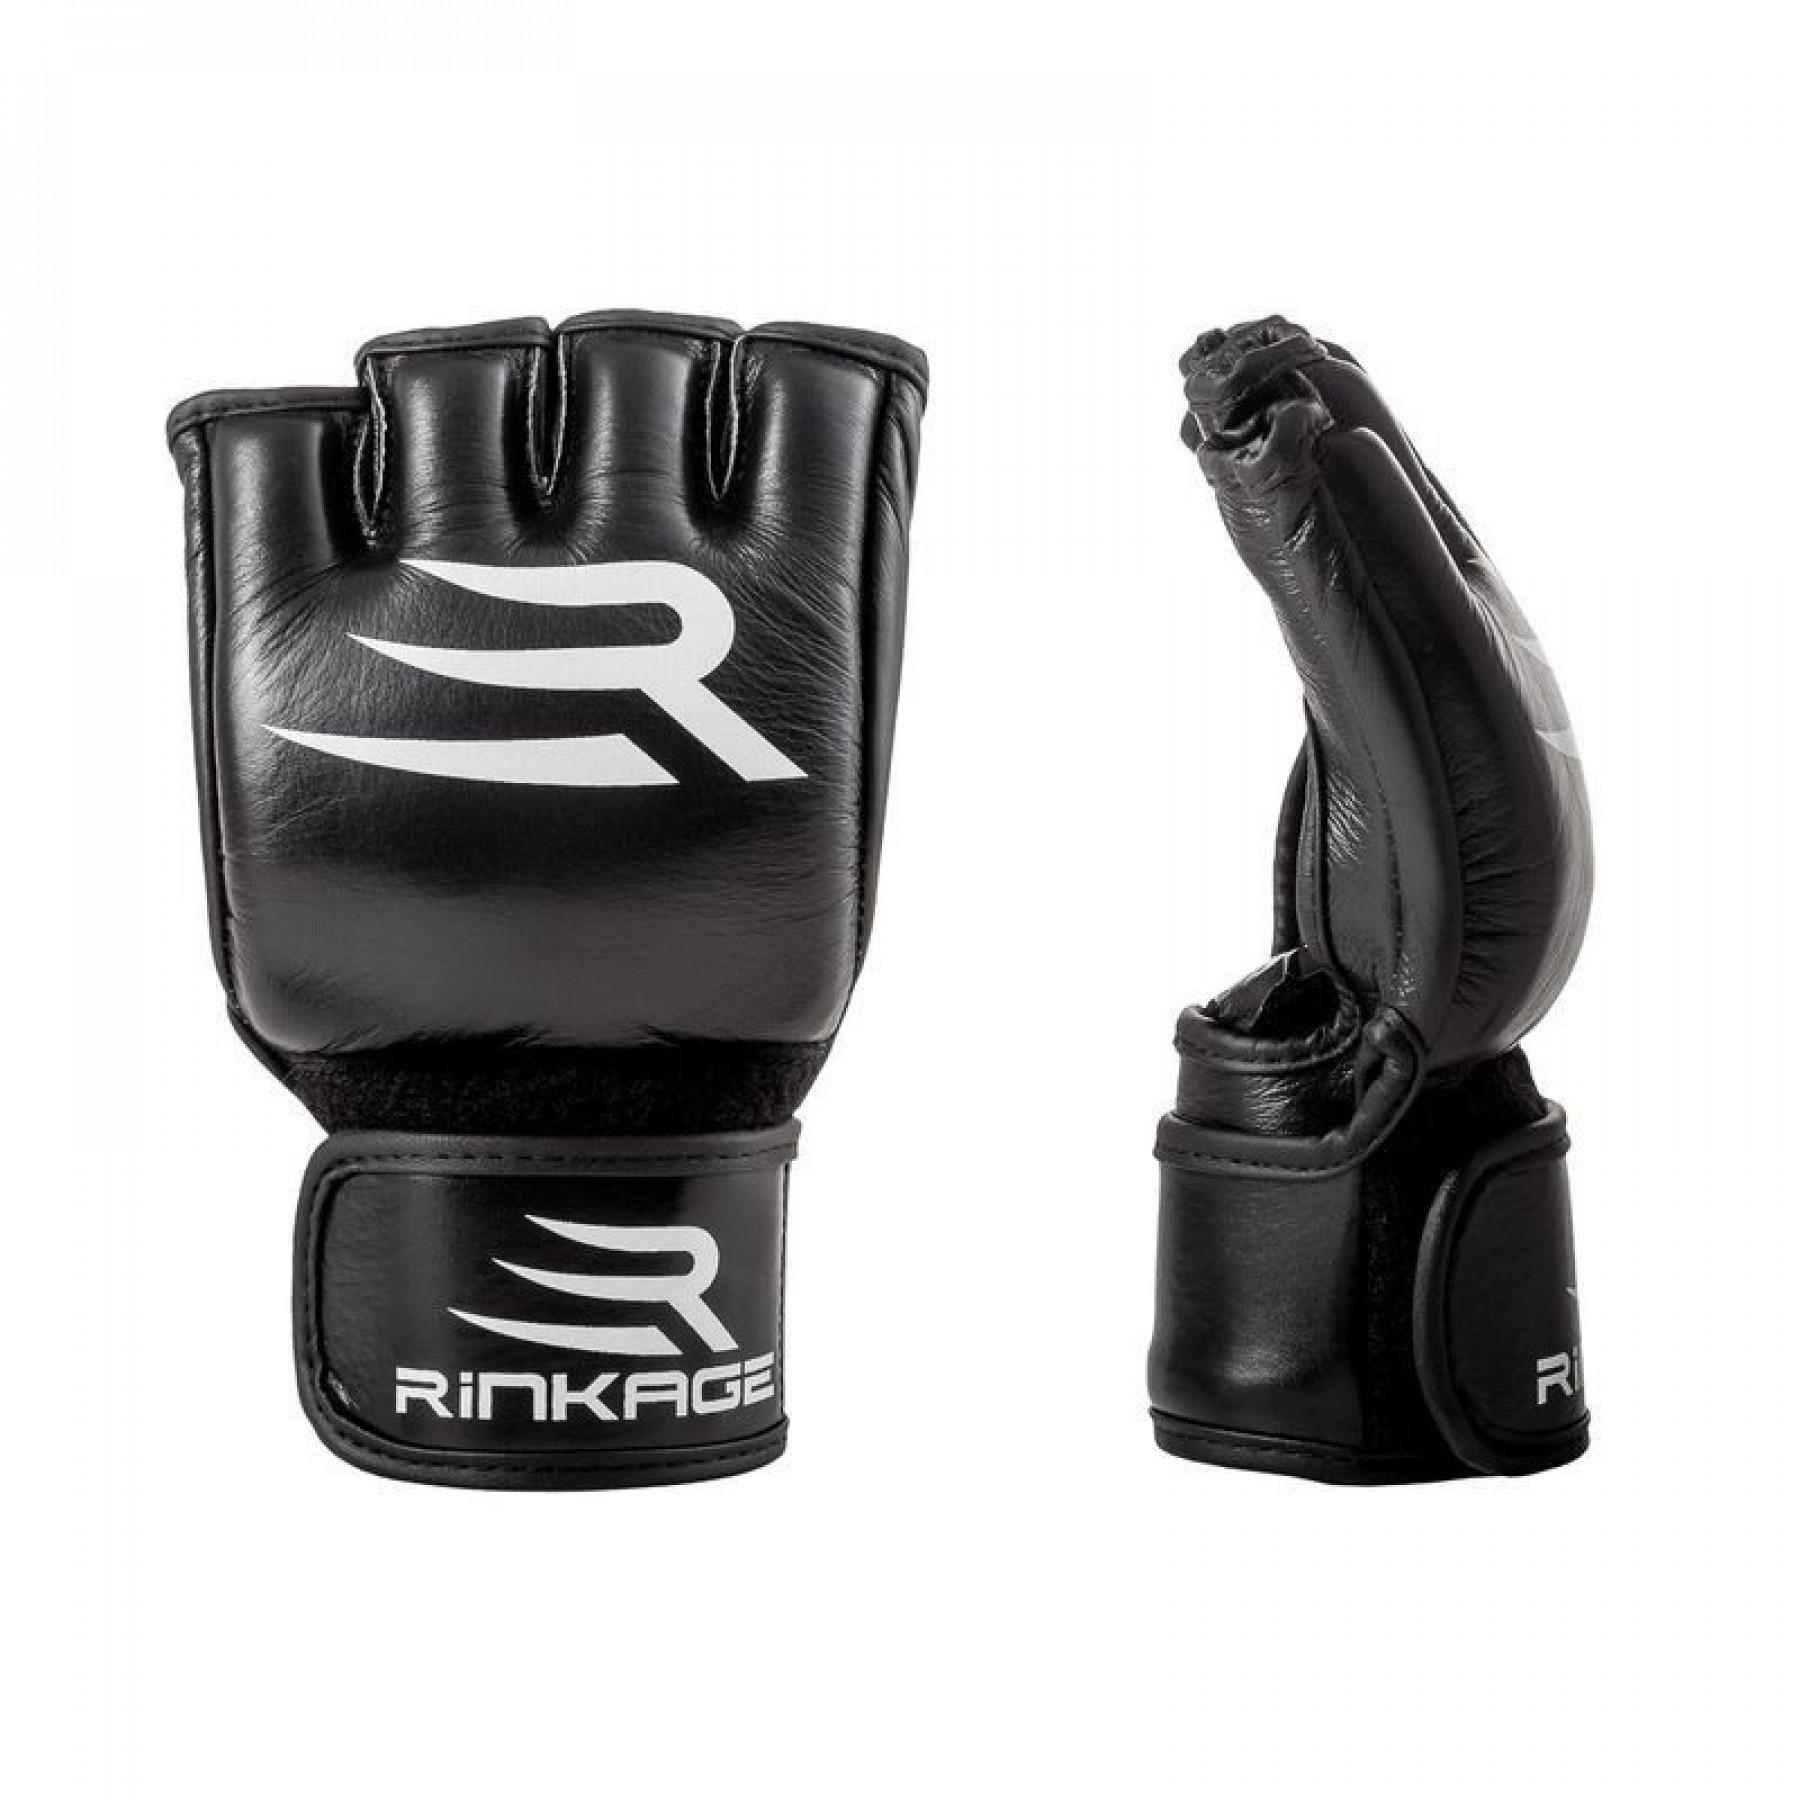 Gloves from mma Rinkage Inmitium